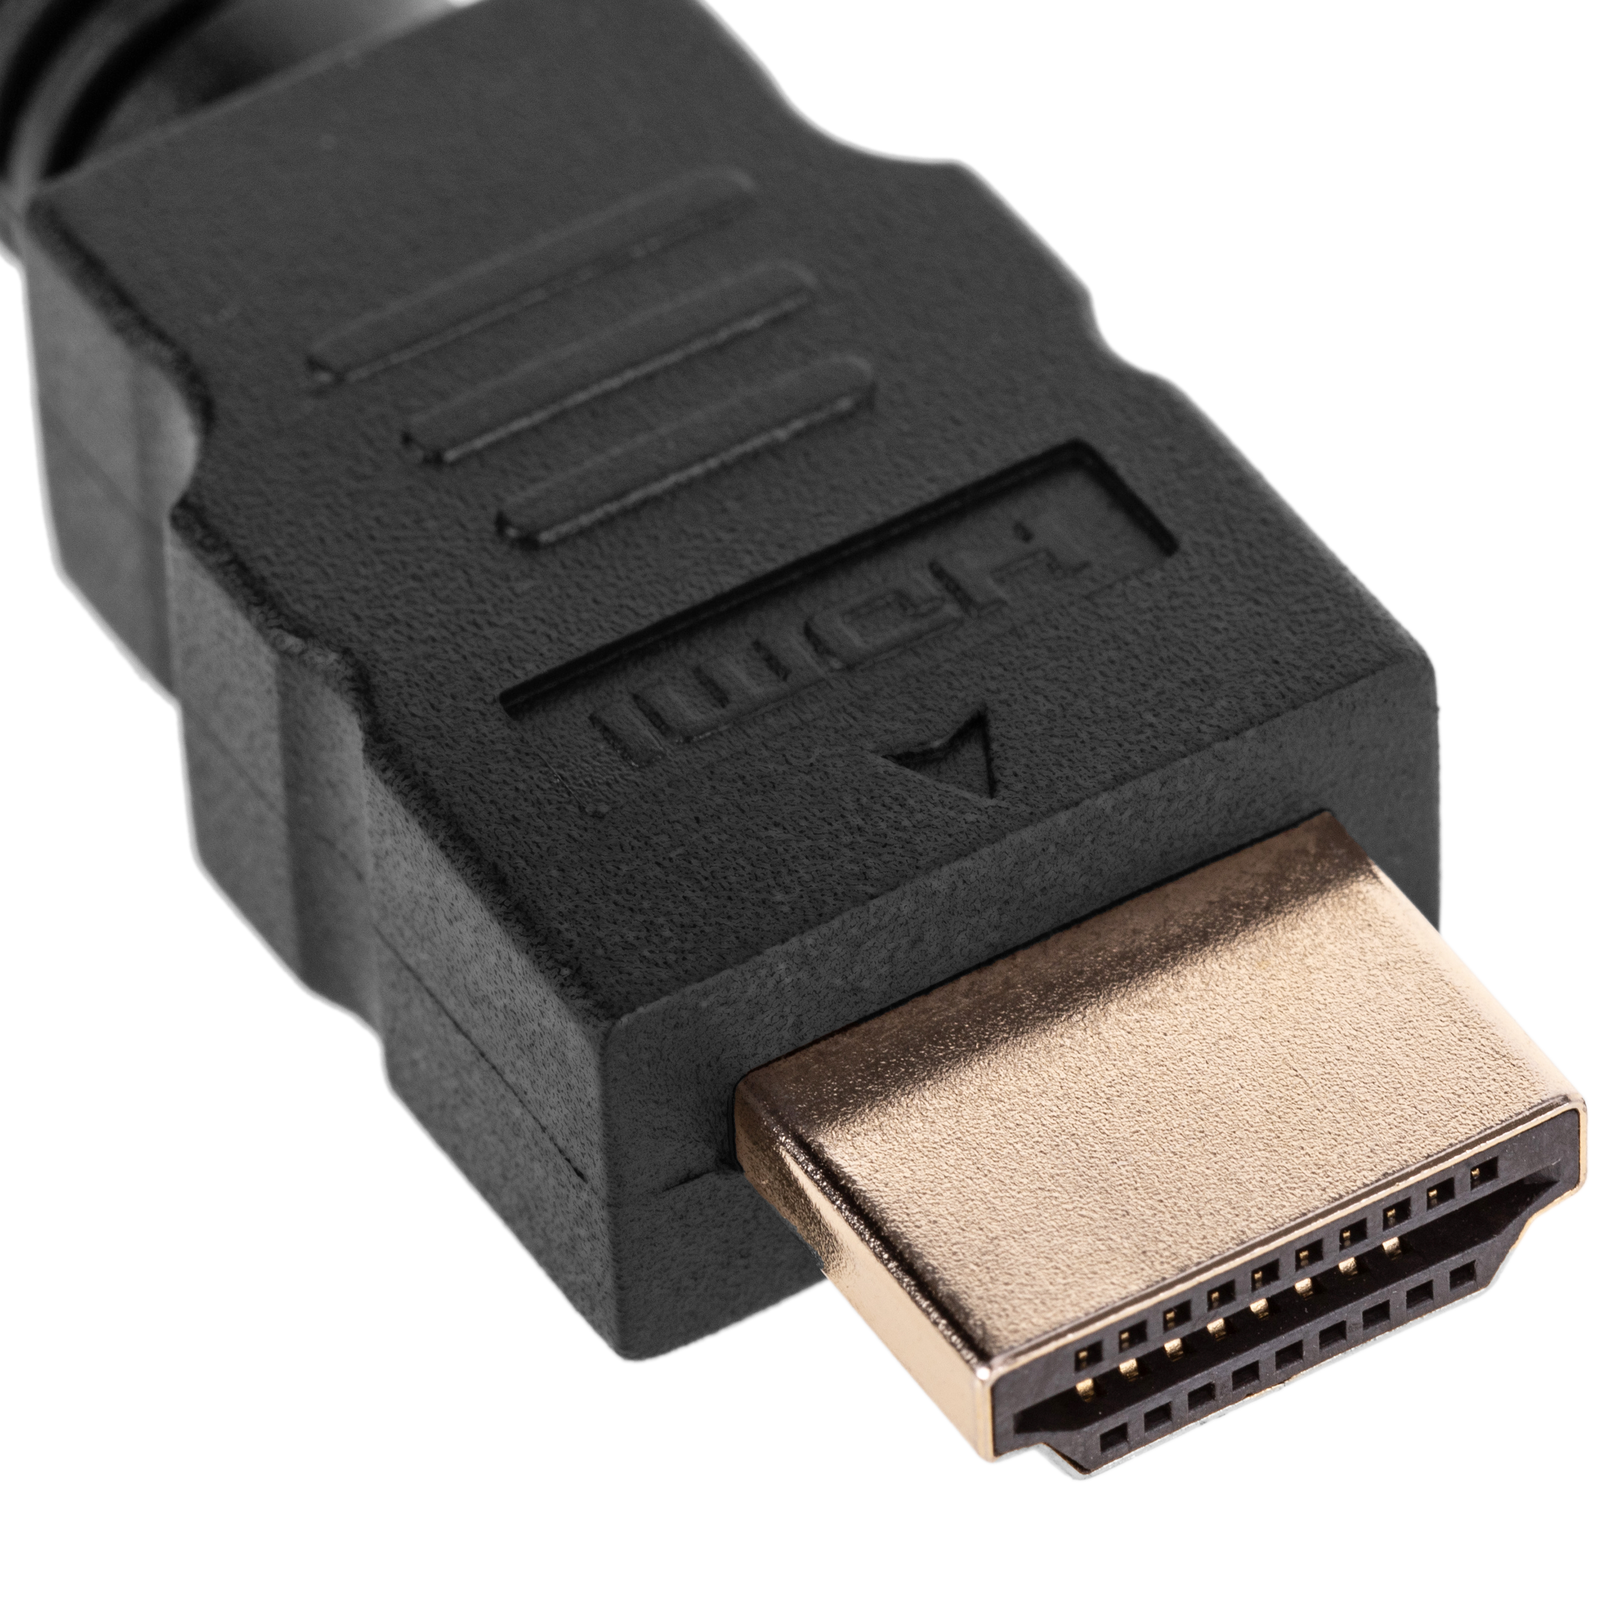 DVI-HD-5M-MM - DVI-D to HDMI-A single link cable, Male to Male (16 feet)